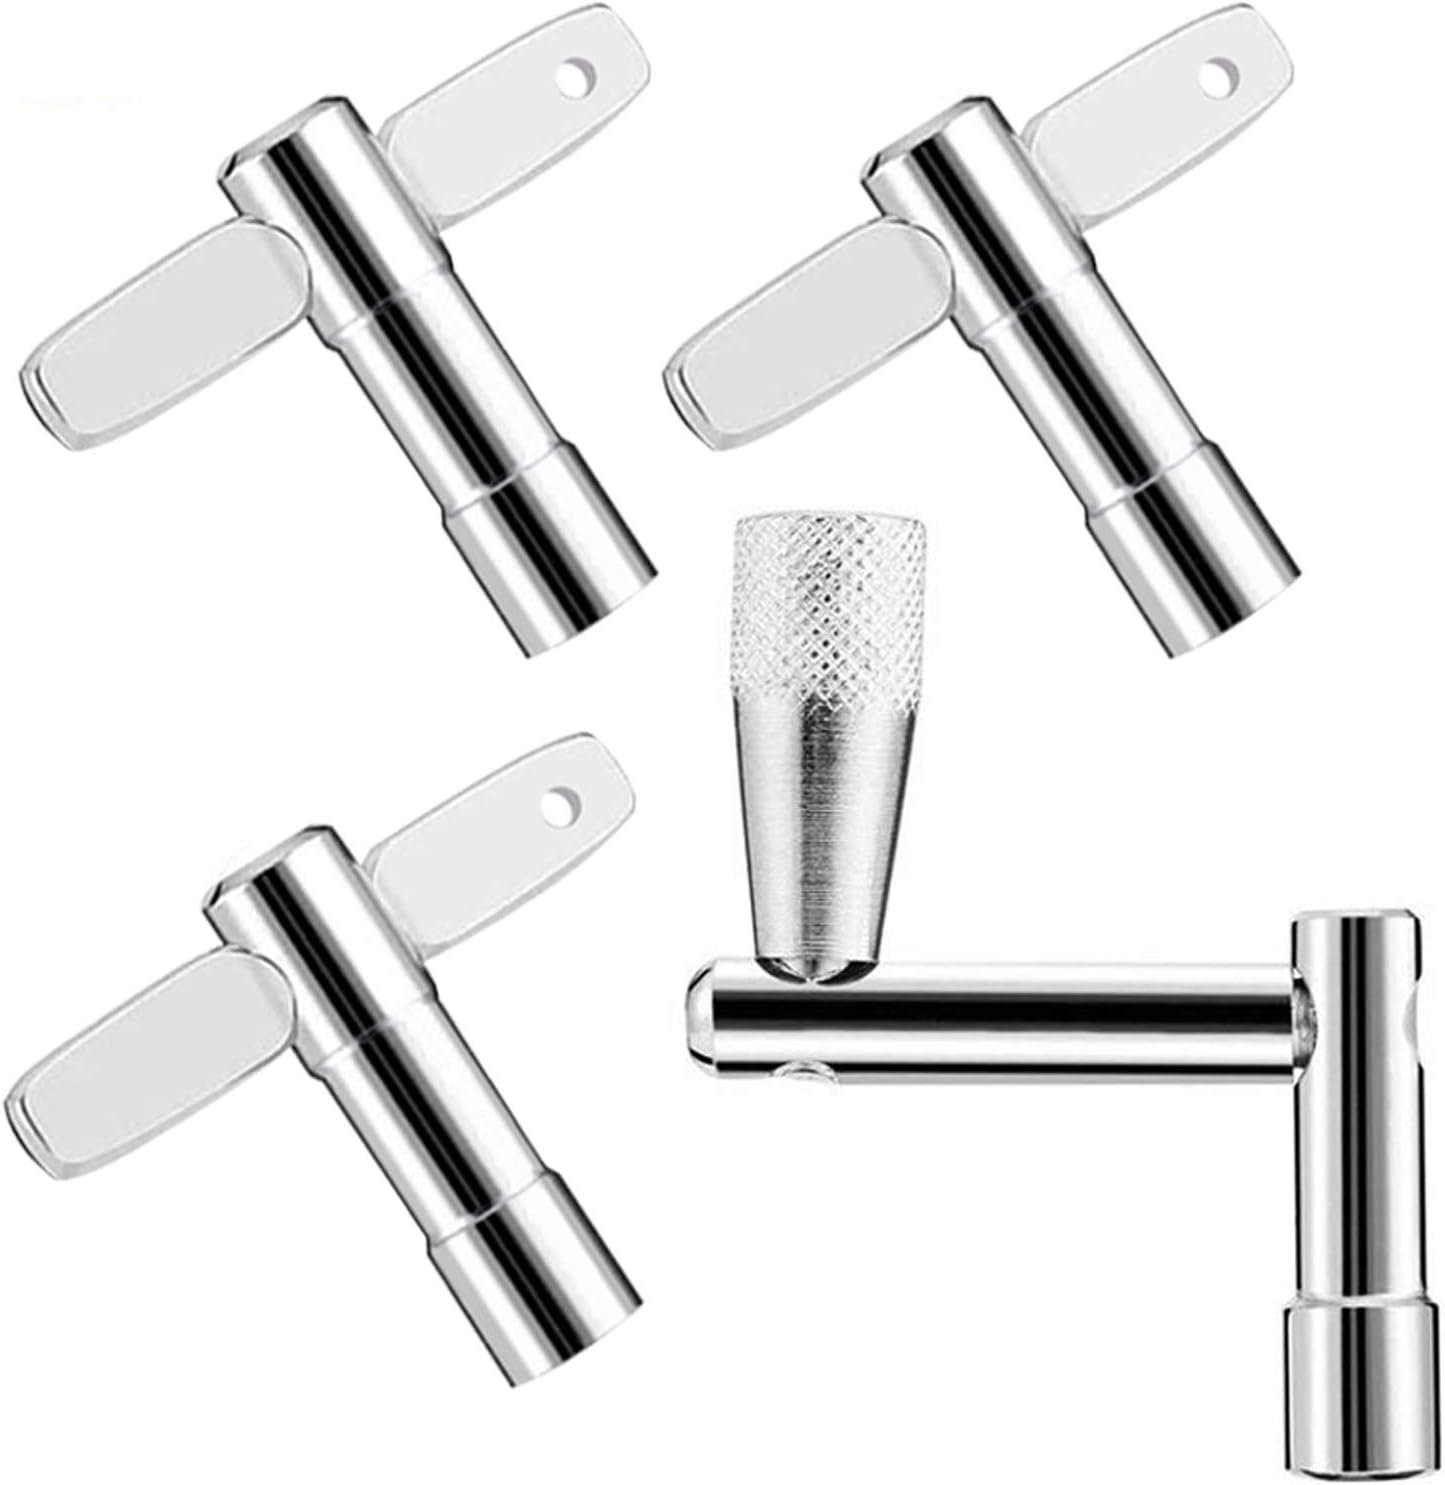 EastRock Drum Keys 3-Pack Drum Tuning Key with Continuous Standard Motion Speed key,Universal Drum Key Tuner (Chrome-Plated Steel)